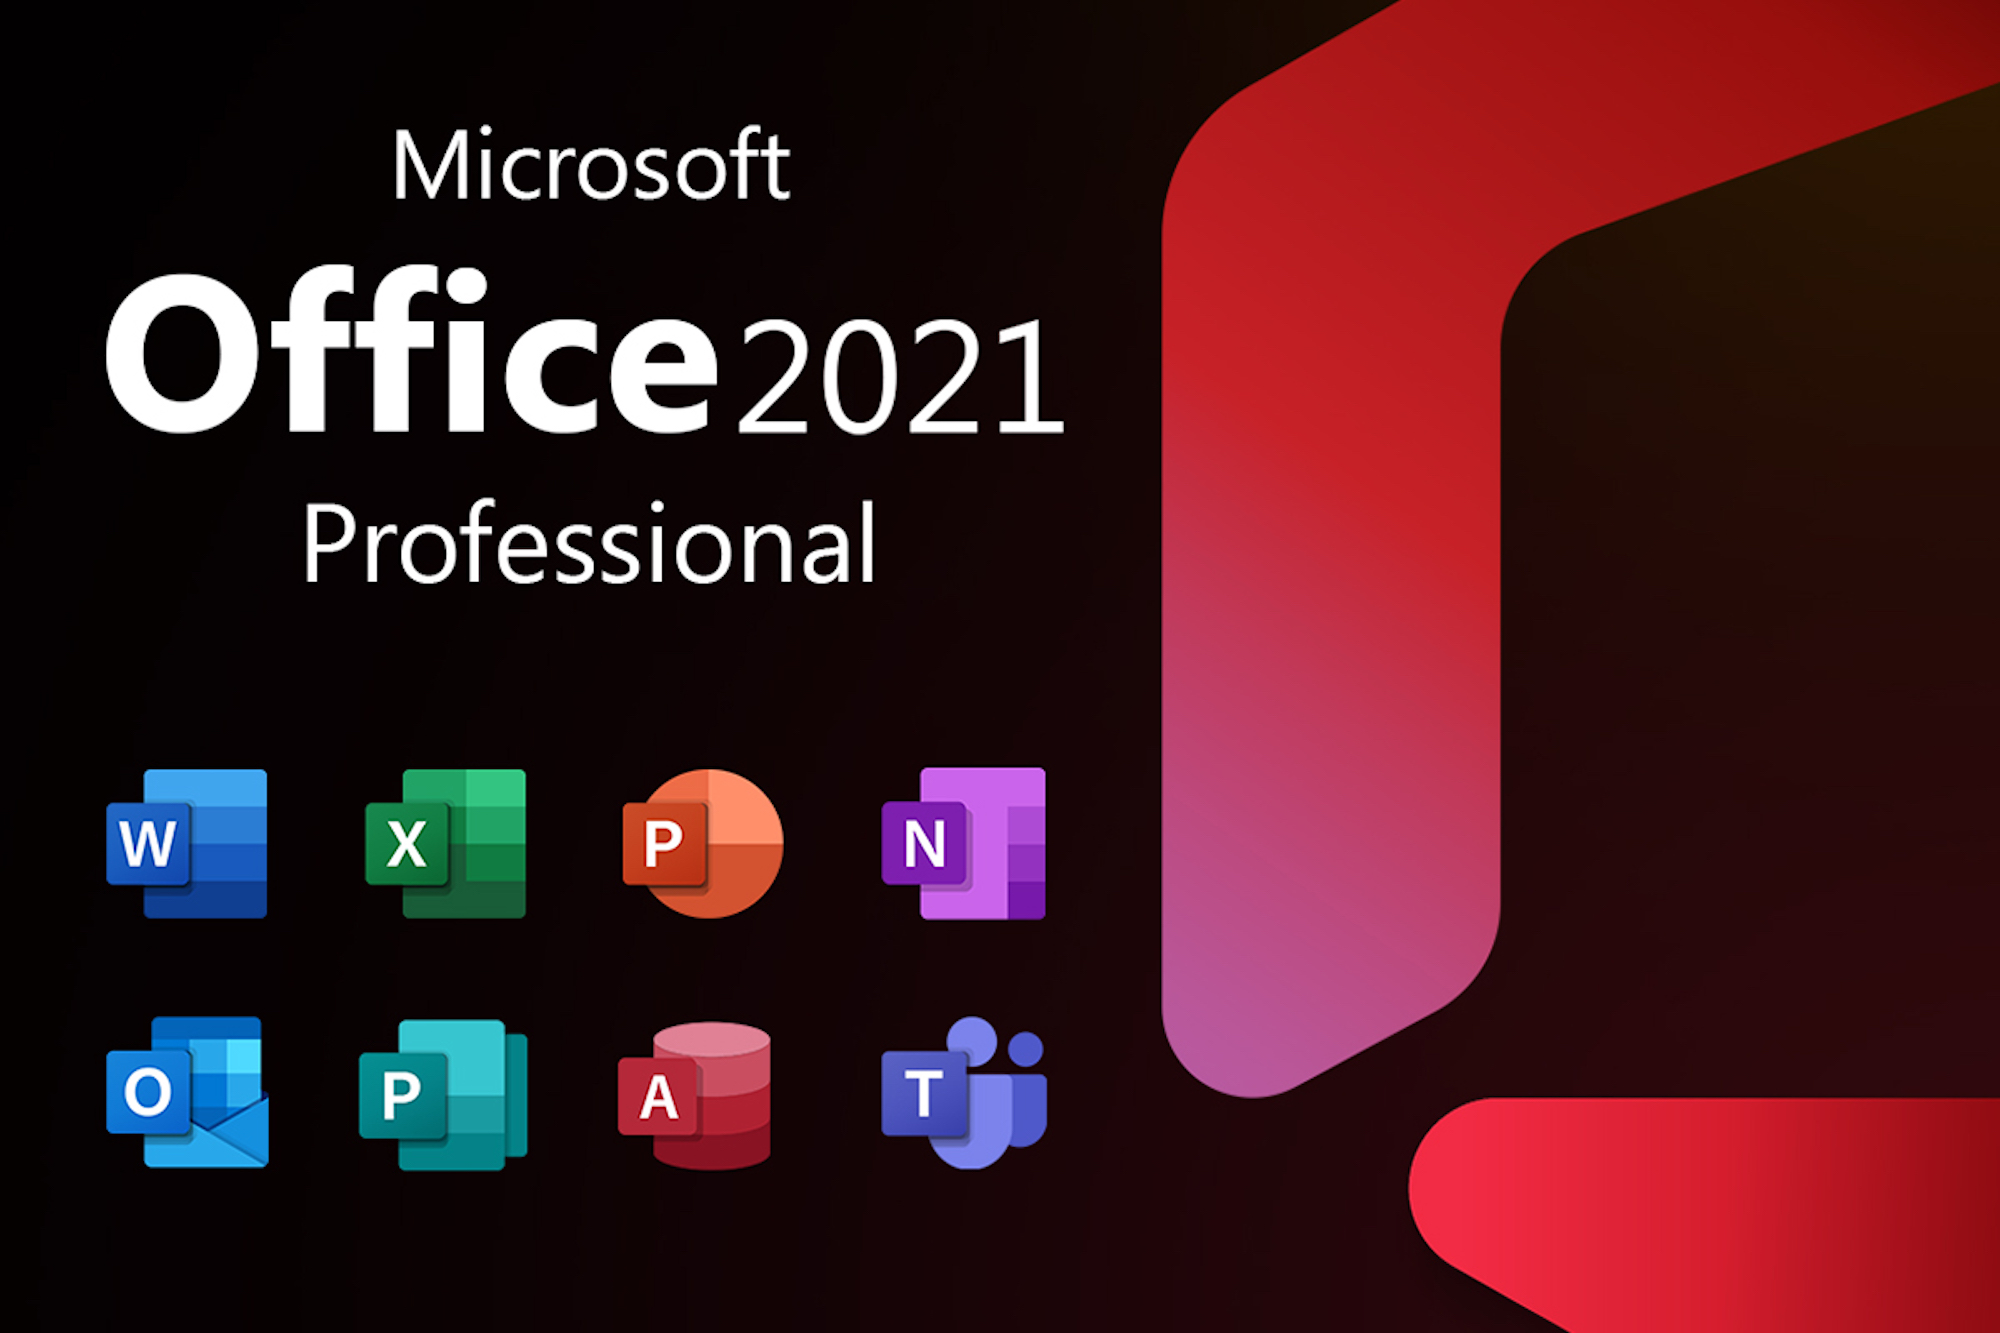 Get Microsoft Office Pro with a one-time purchase for only $30